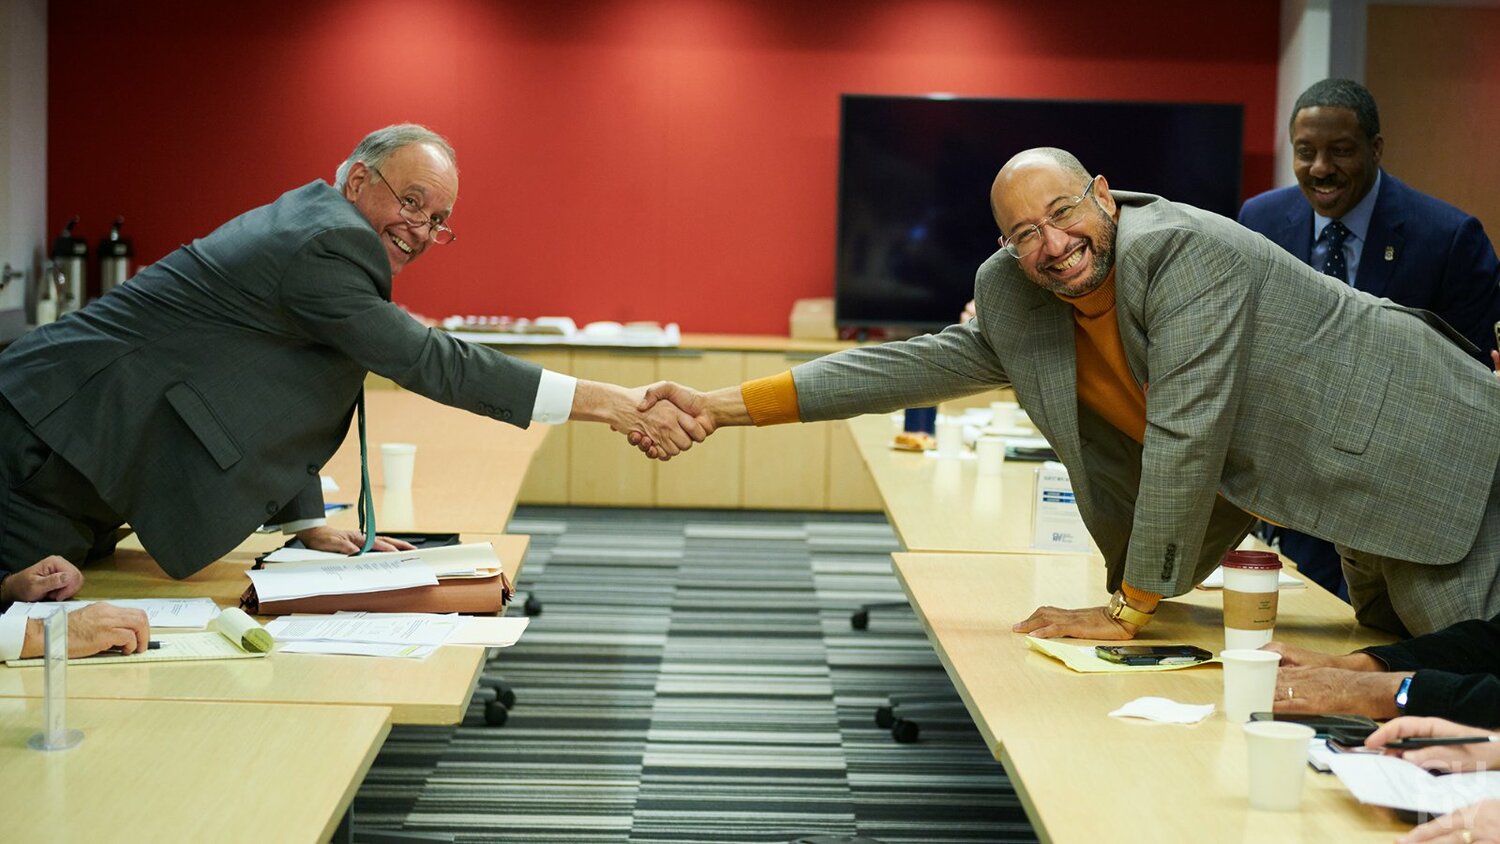 CUNY Chancellor Félix V. Matos Rodríguez shook the hand of District Council 37 Executive Director Henry Garrido after they reached a tentative contract agreement. The pact, announced Wednesday, provides 14.9 percent in compounded raises and a $3,000 ratification bonus.